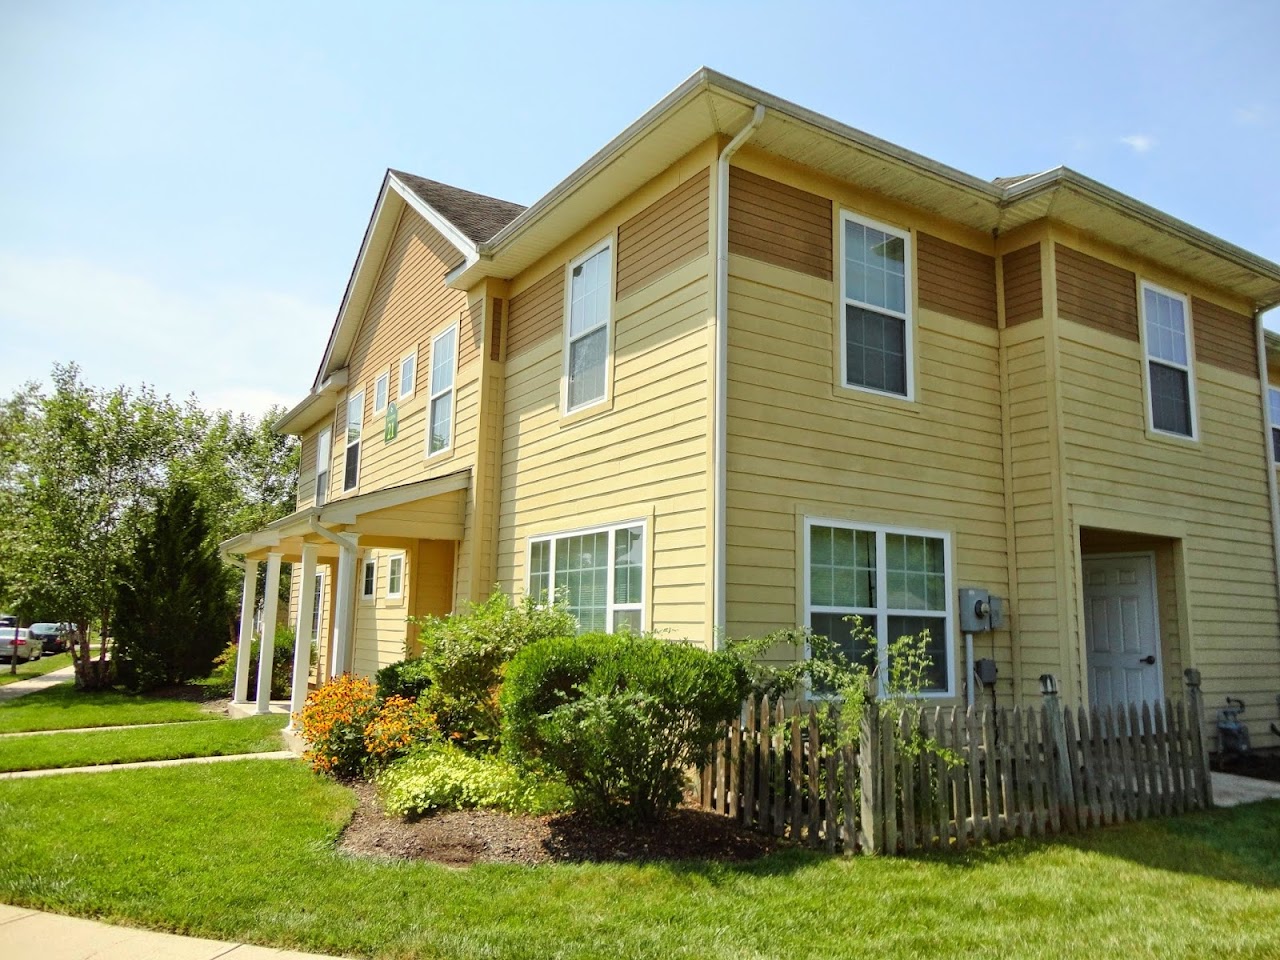 Photo of EASTAMPTON TOWN CENTER. Affordable housing located at 25 SAWYERS AVE EASTAMPTON TOWNSHIP, NJ 08060